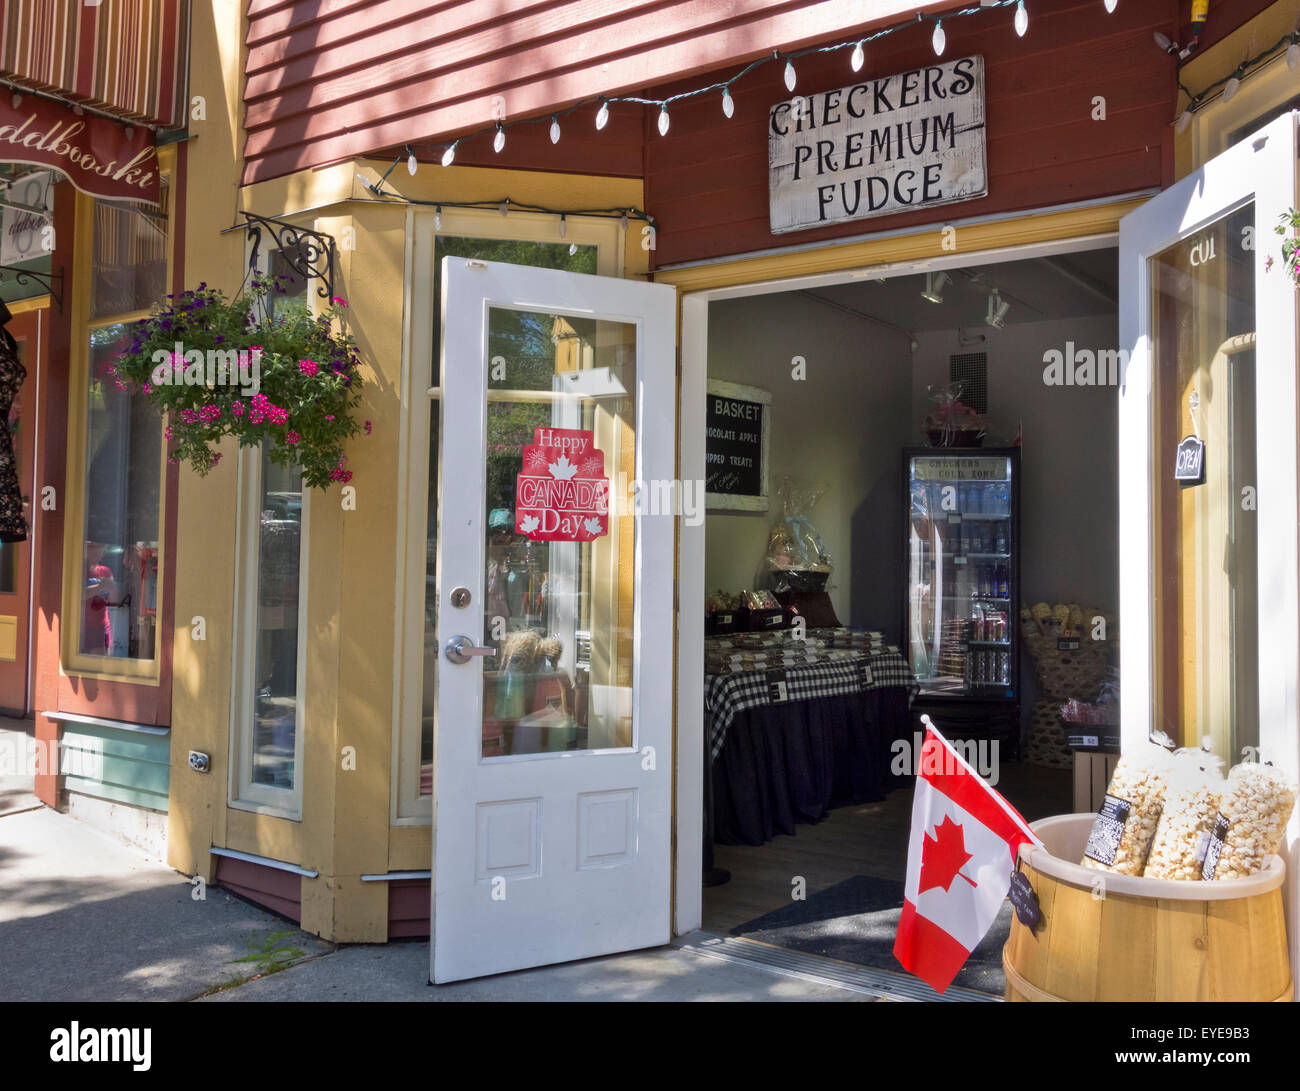 Checkers Premium Fudge Shop with doors open and decorated for Canada Day in Fort Langley, BC, Canada.  Canadian flags. Stock Photo